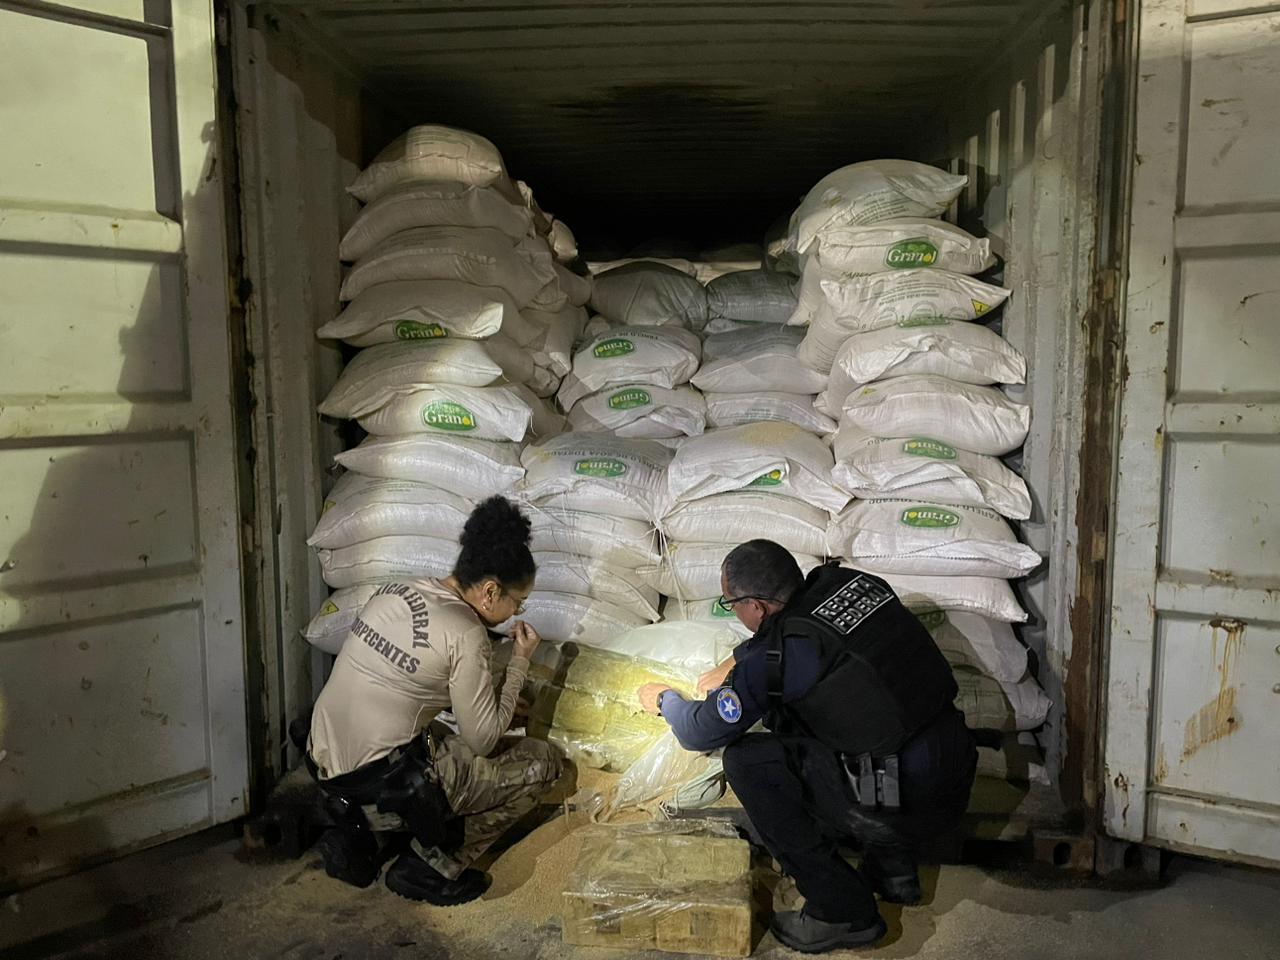 Brazilian Federal Police Carries Out One of Largest Cocaine Seizures at Ports